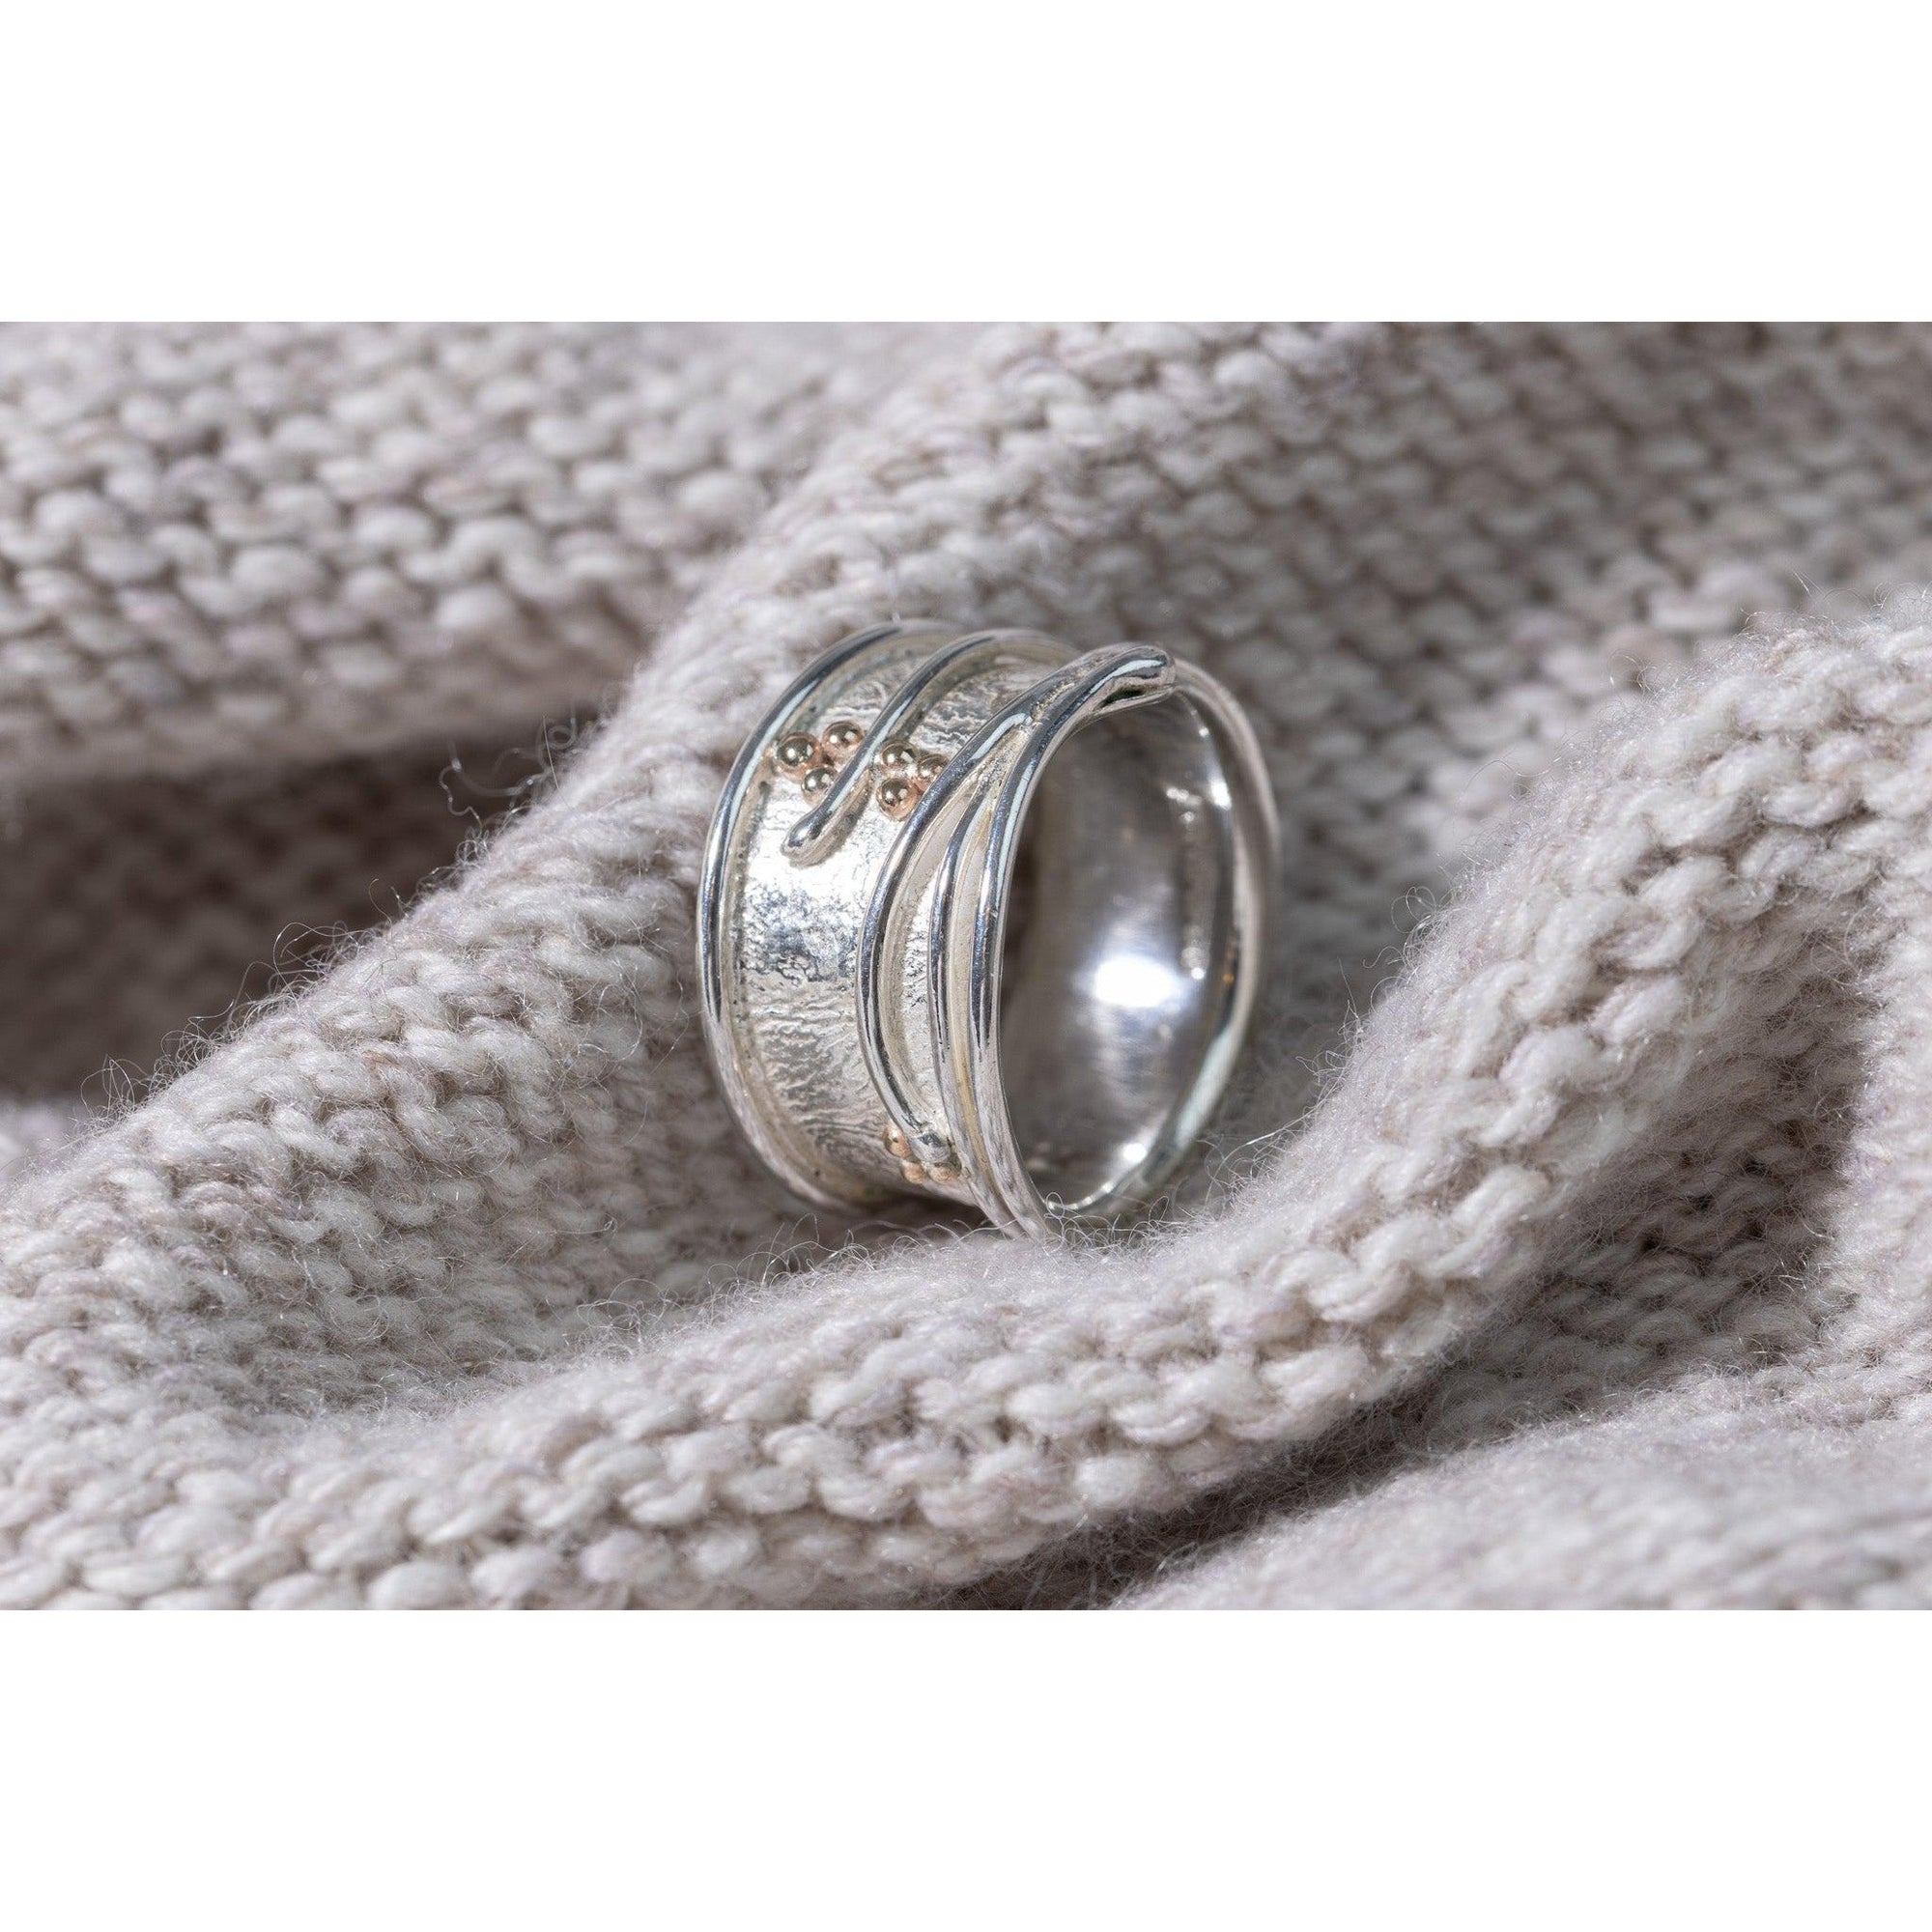 'LG53 - Wide Silver Ring with Gold Beads' by Les Grimshaw, available at Padstow Gallery, Cornwall